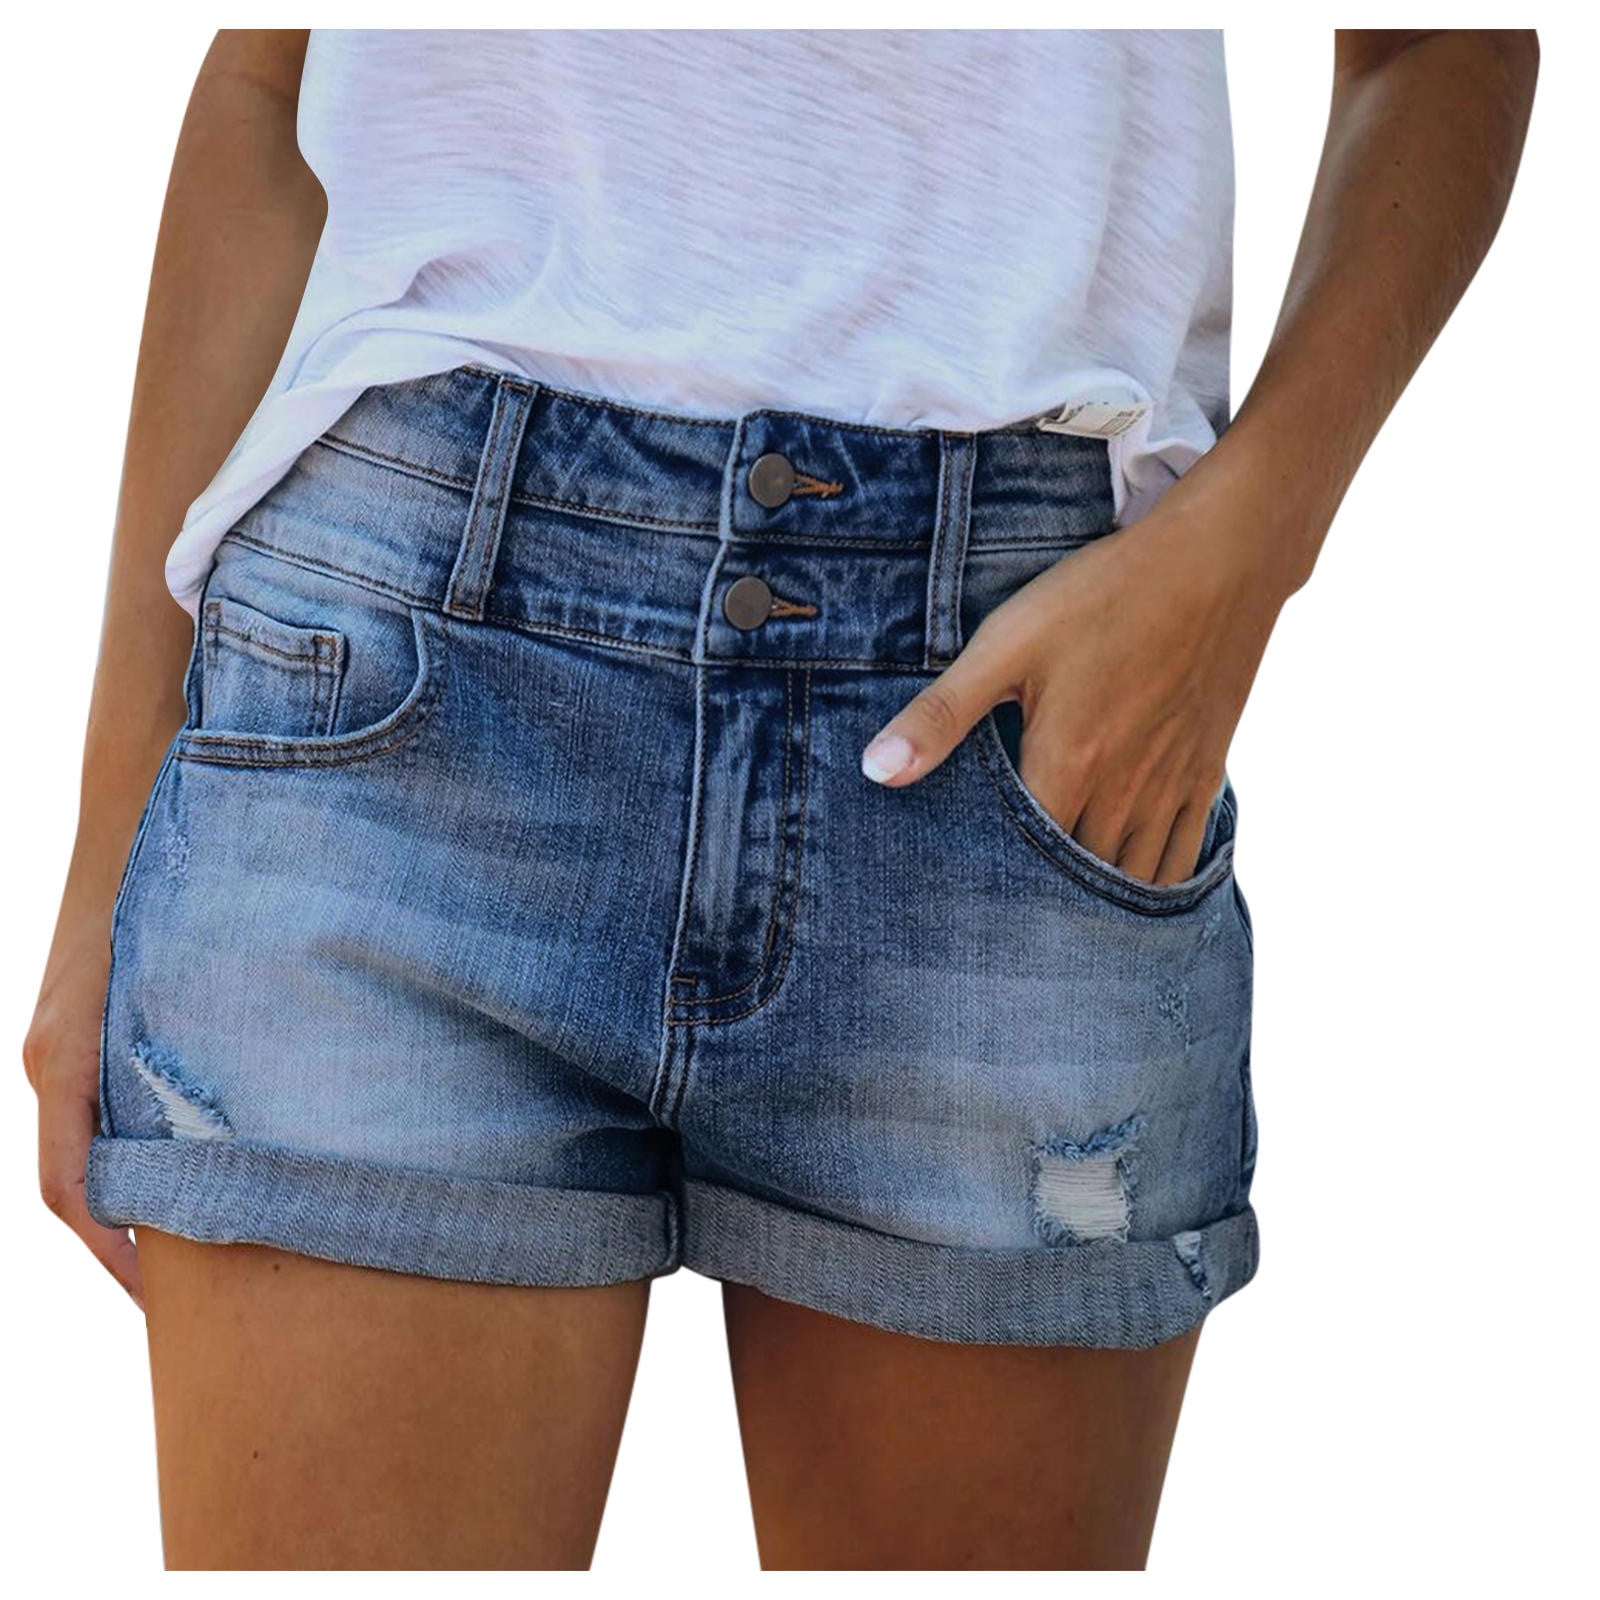 Women Sexy Candy Color Hot Pants Stretch Shorts Feminine Sports